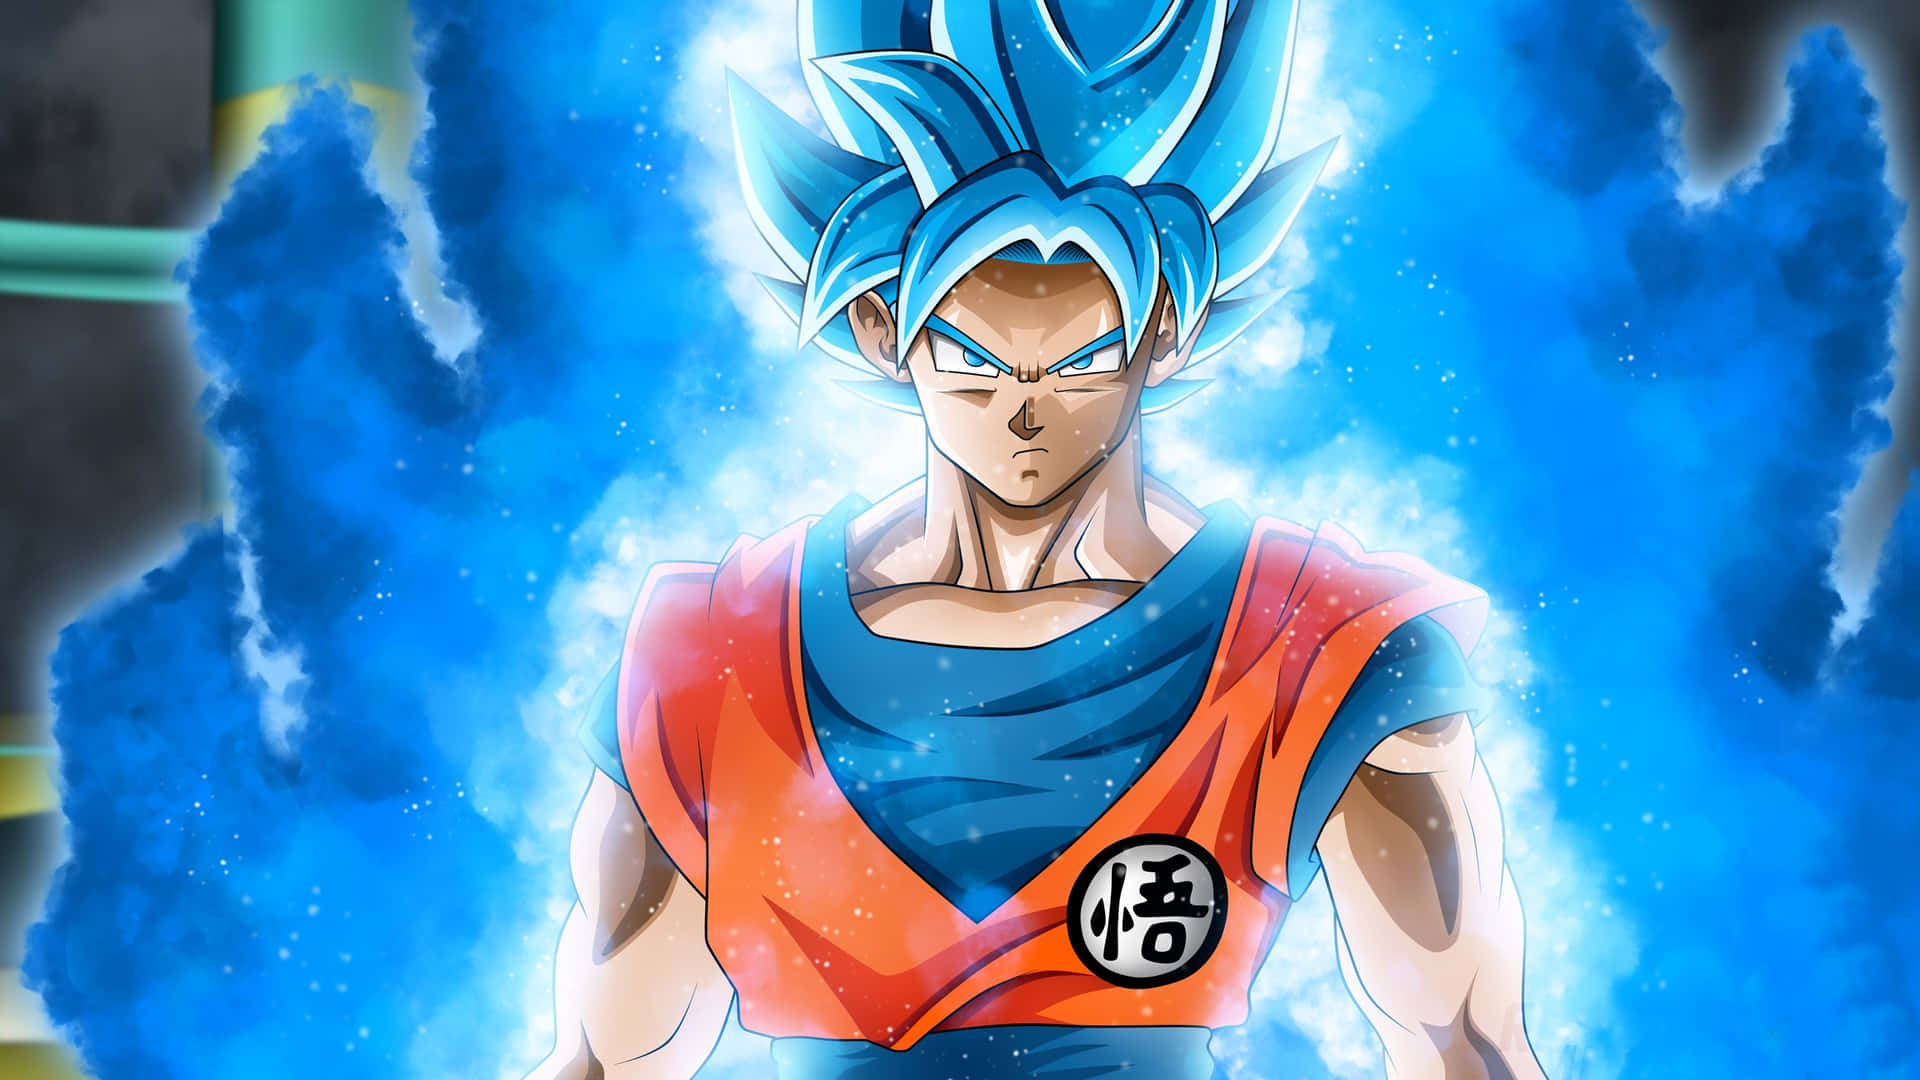 Transform into the ultimate form of power with Super Saiyan Blue." Wallpaper